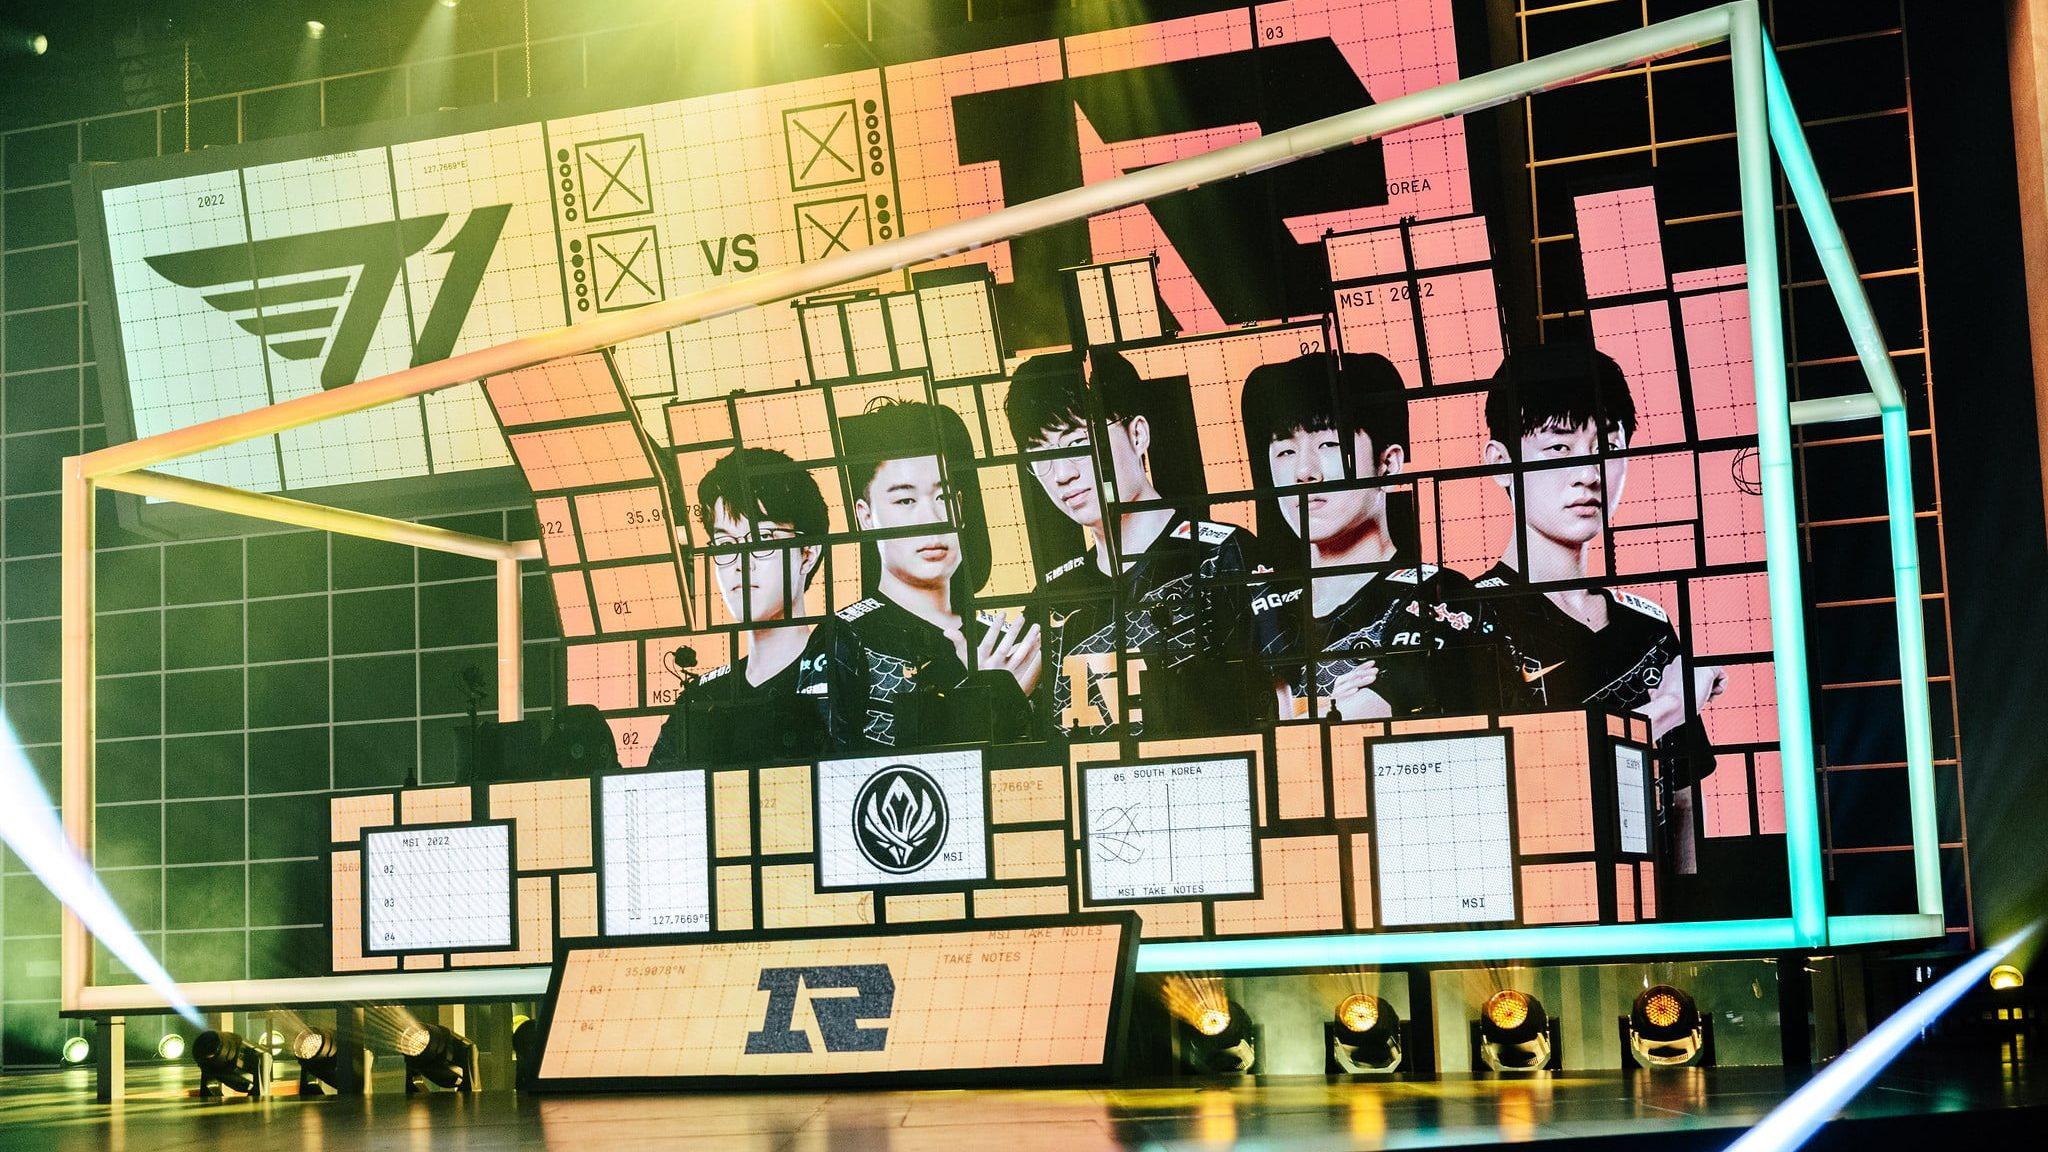 RNG player images on stage at MSI 2022